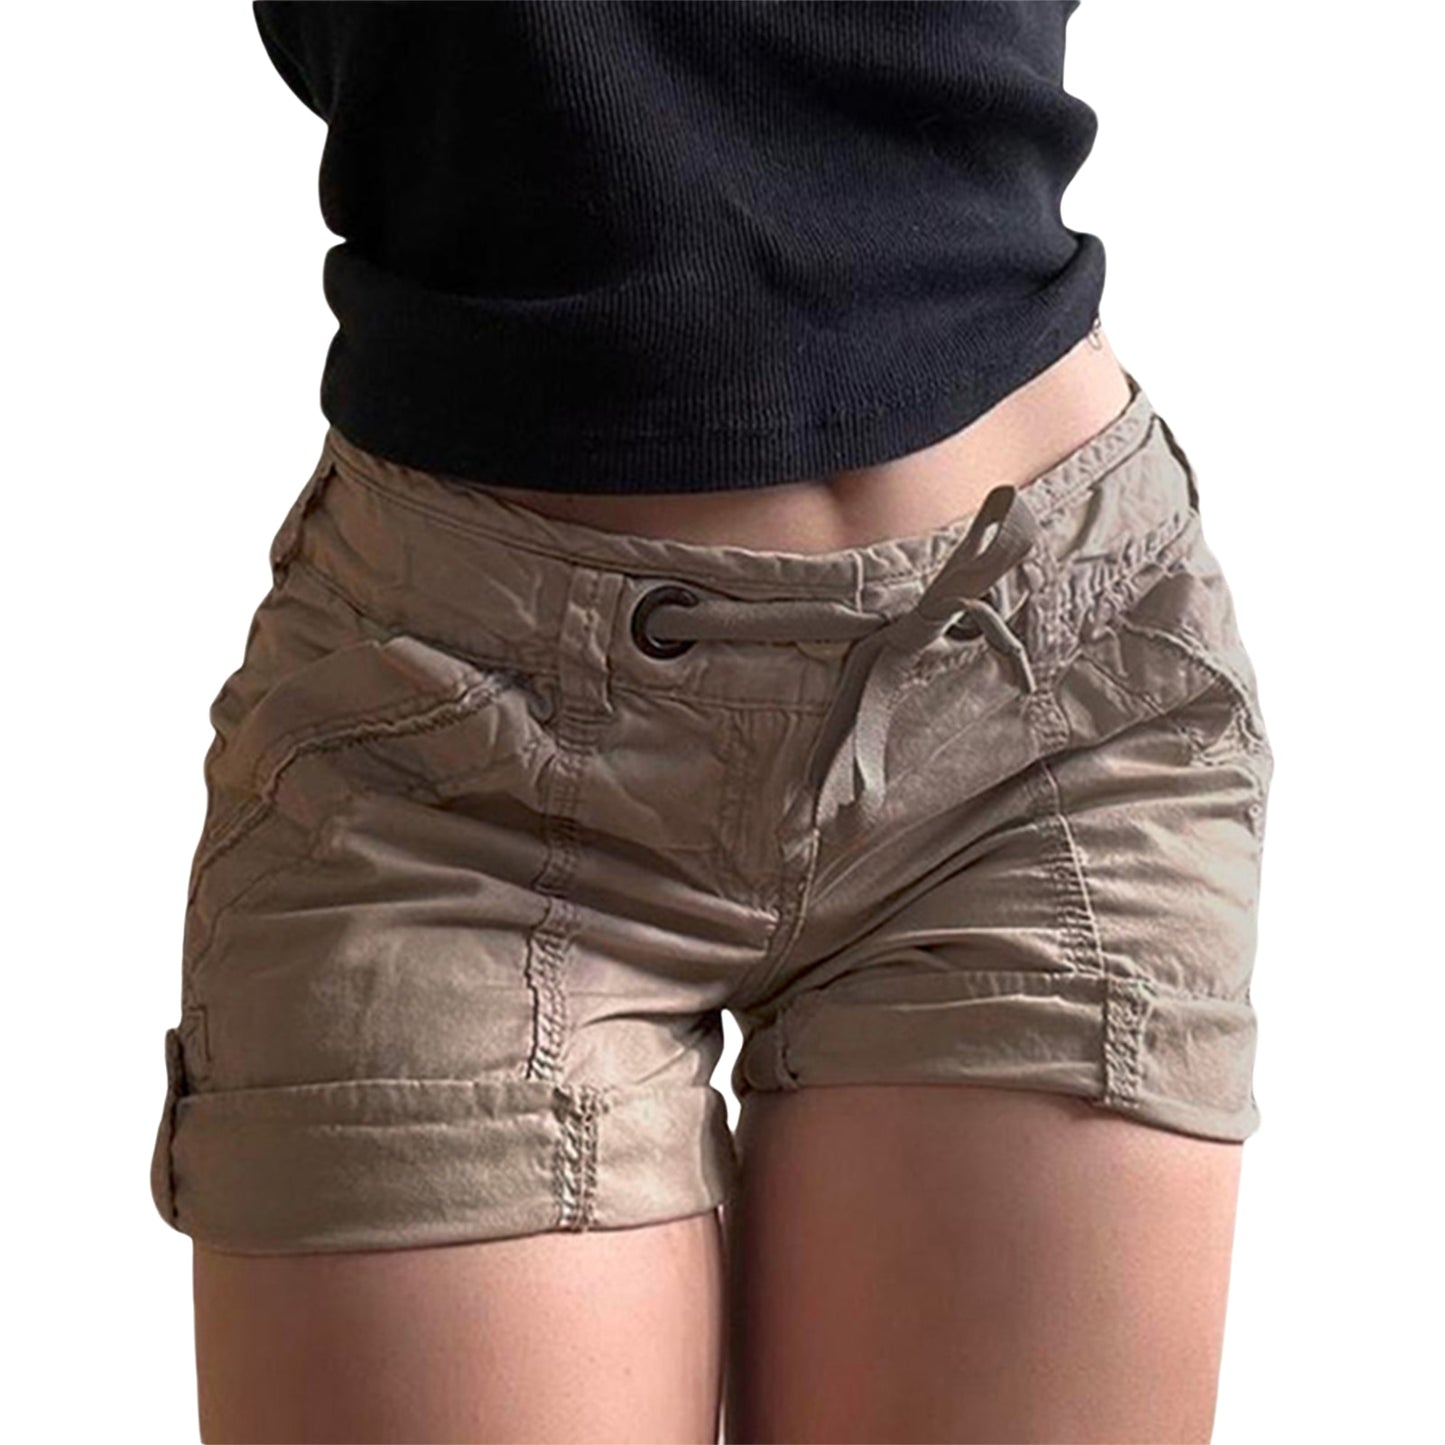 Women's Casual Slim Fitted Shorts